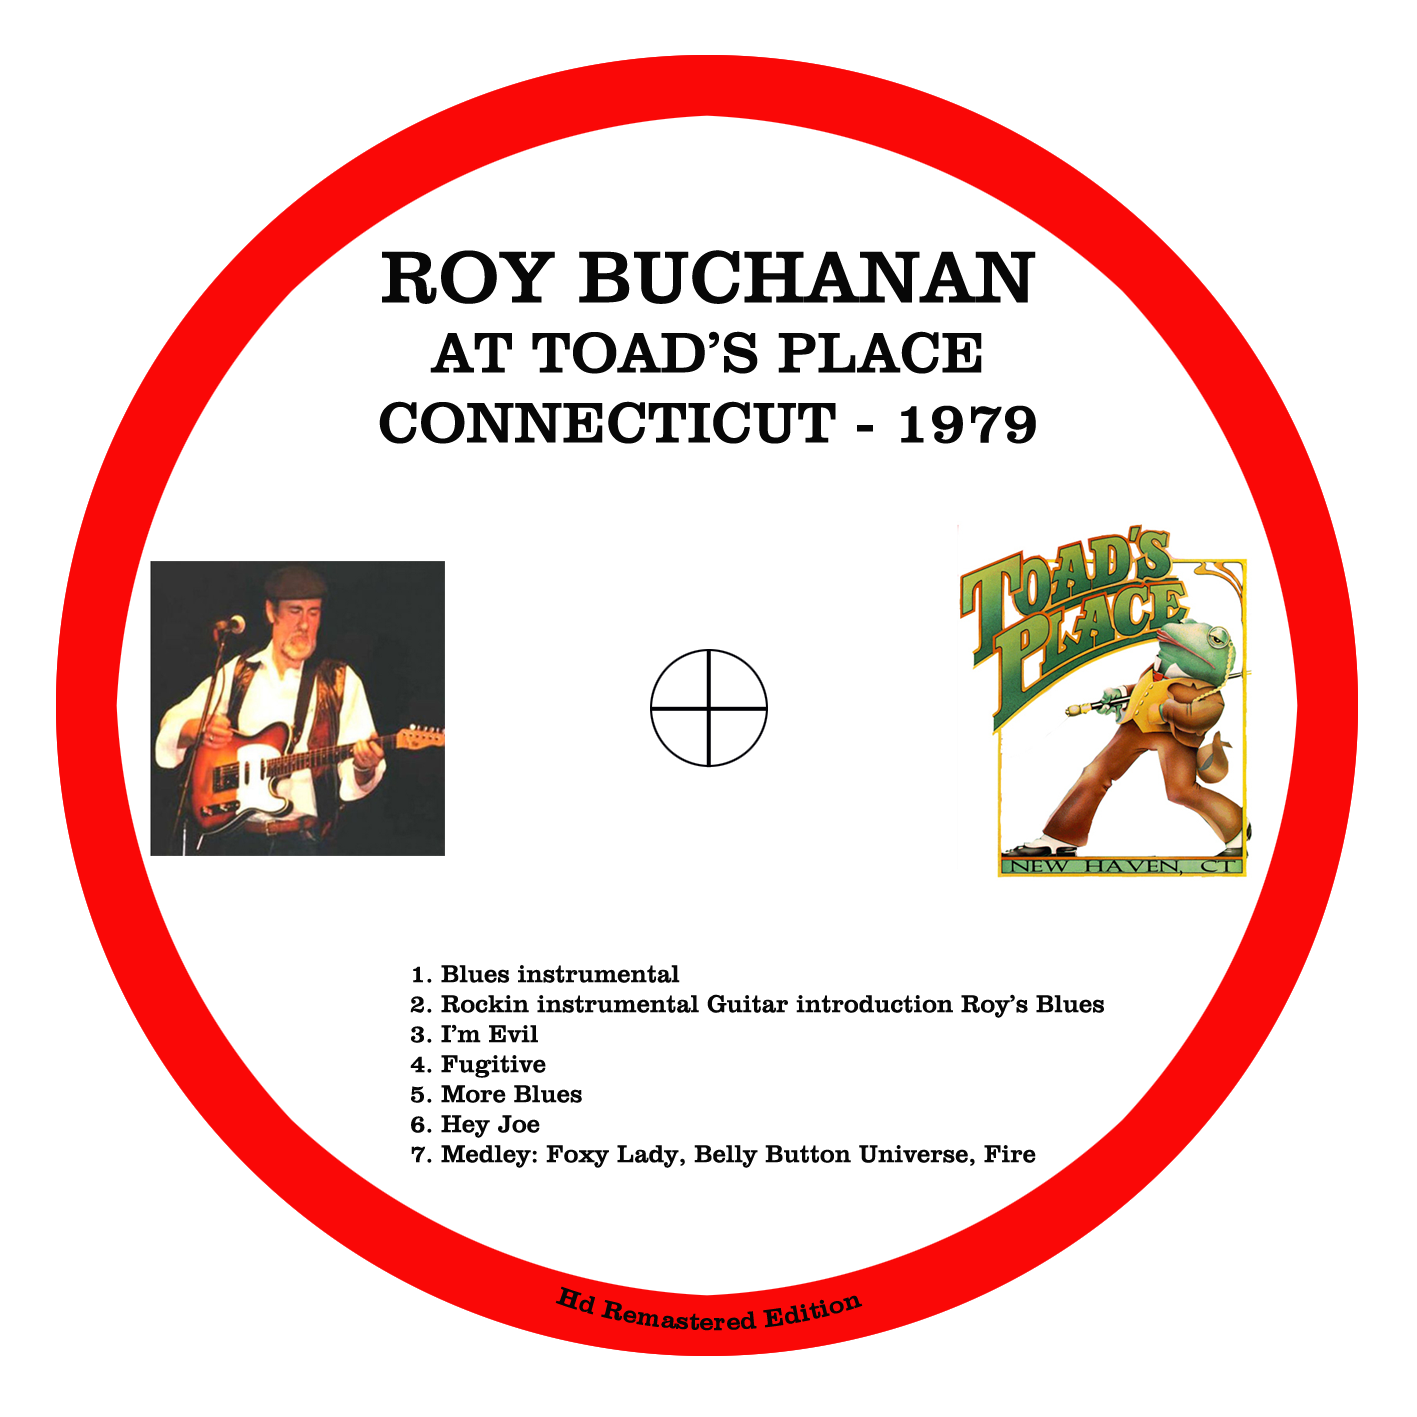 roy buchanan cdr toad's place connecticut 1979 label